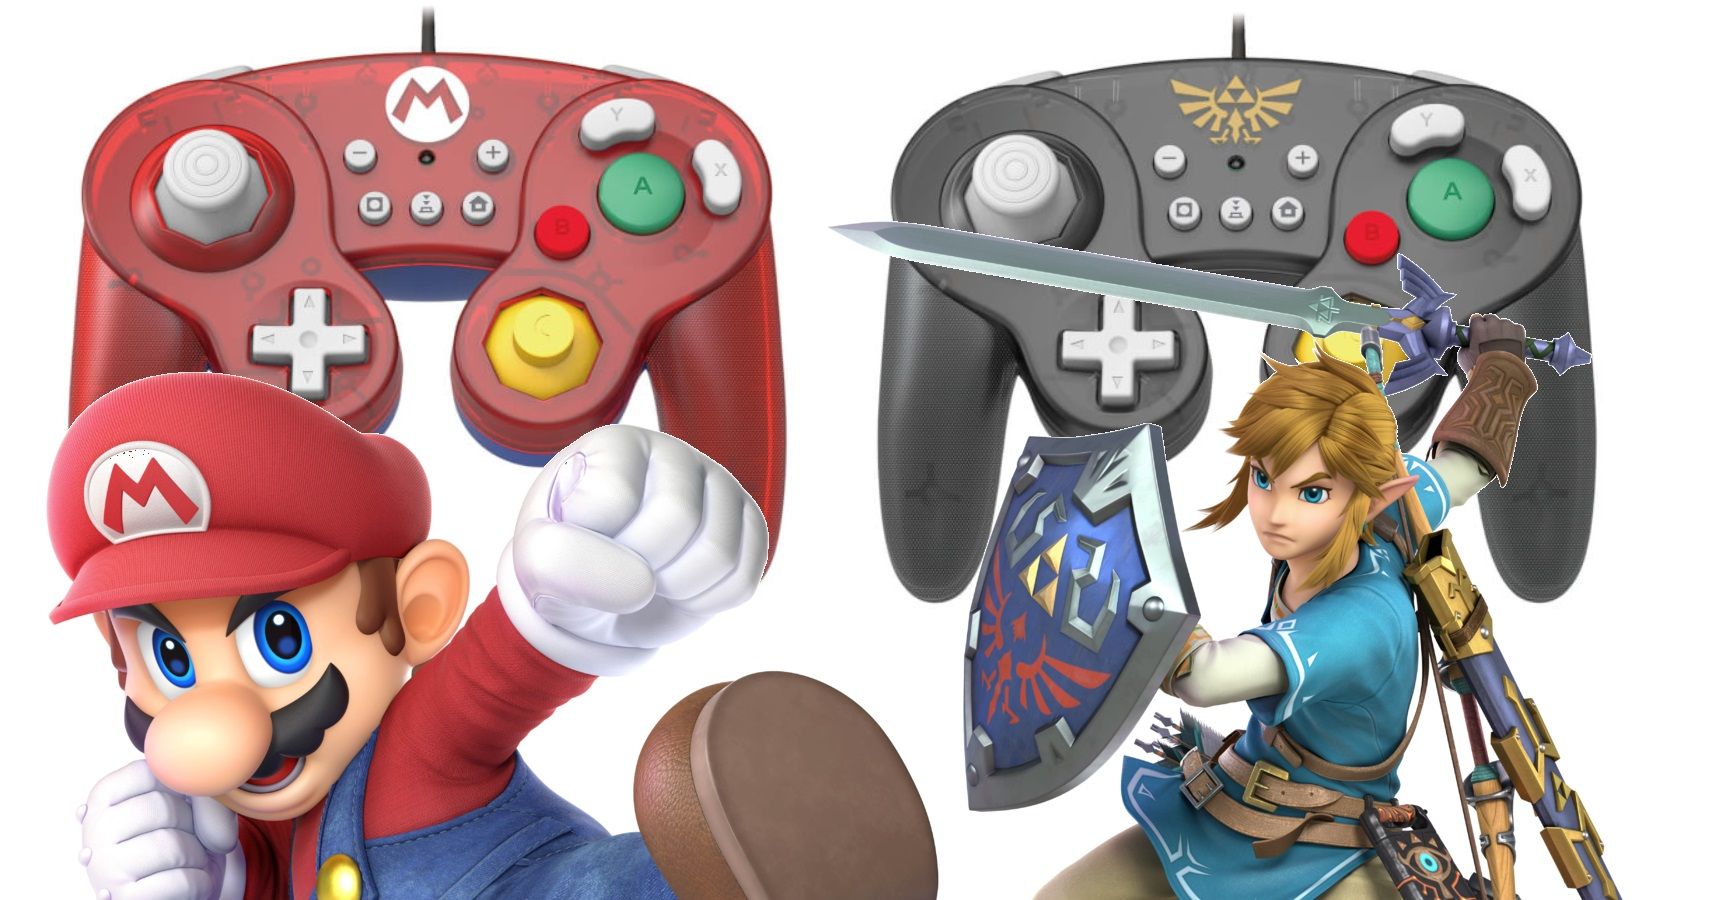 Get Mario And Link New Ultimate Bundle Controllers Switch Smash Bros. With GameCube